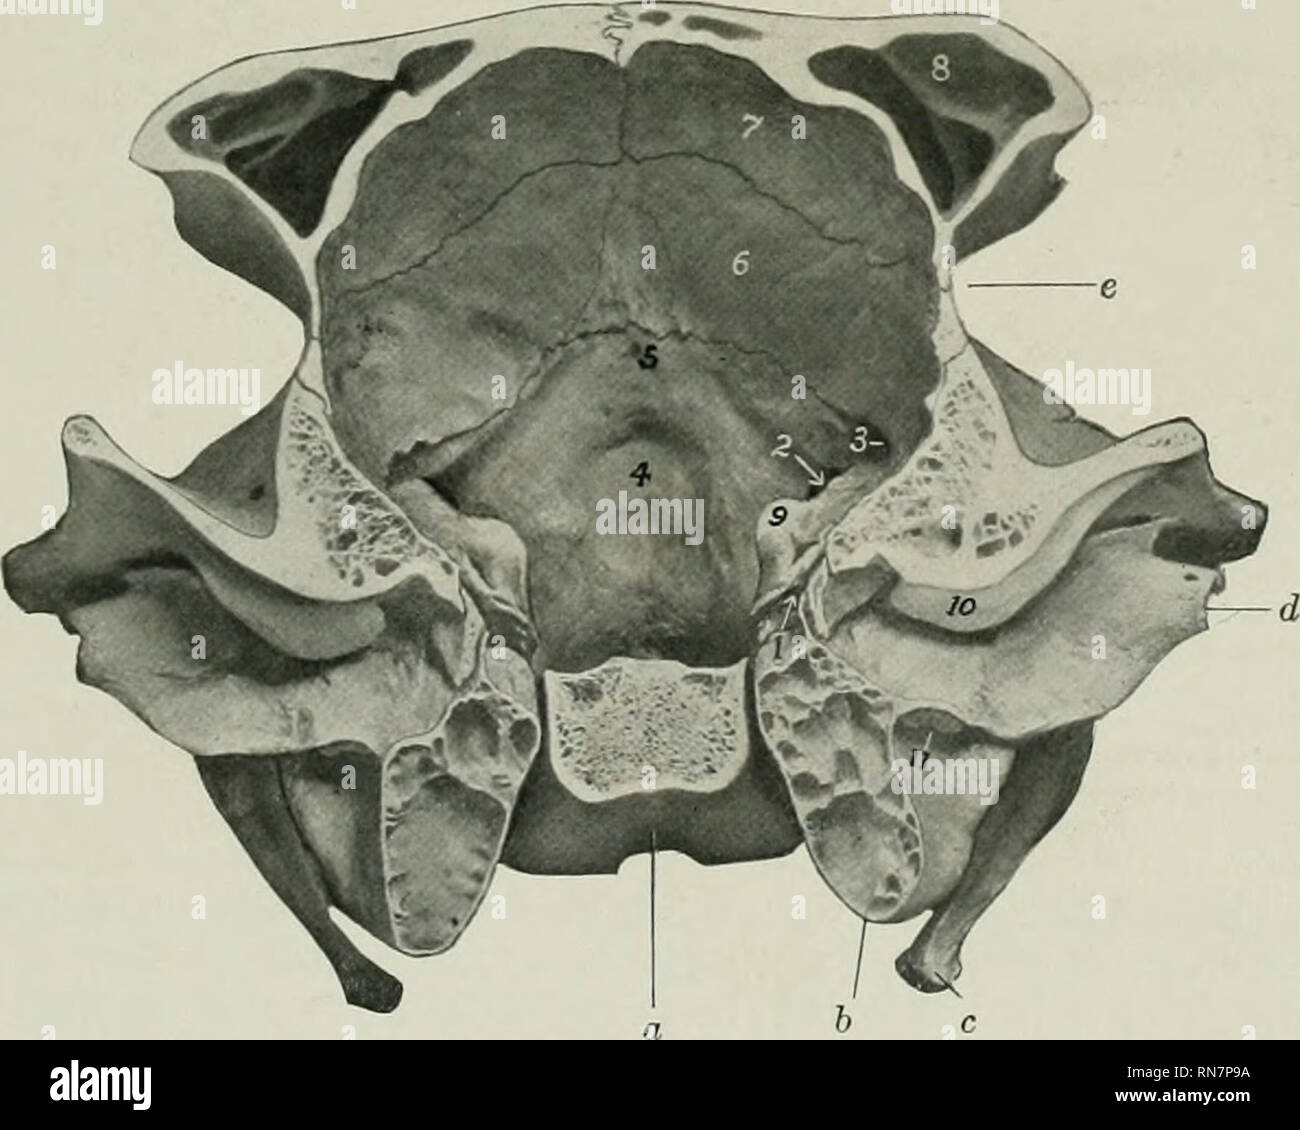 . The anatomy of the domestic animals. Veterinary anatomy. Fig. 130.—Cross-section of Cranium of Ox. The section cuts the posterior part of the temporal condyle and is viewed from behind, a, Body of sphenoid; 6, bulla ossea; c, temporal condyle; 1, dorsum sellse; 2, foramen ovale; 3, hypophyseal or pituitary fossa; 4, foramen orbito-rotundum; 5, optic foramina: 0. crista galli; 7, cribriform plate of ethmoid; S, orbital wing of sphenoid; 9, temporal wing of sphenoid; 10, internal plate of frontal bone; 11, frontal sinus; 12, temporal process of malar bone.. Fig. 131.—Cross-section of Cranium o Stock Photo